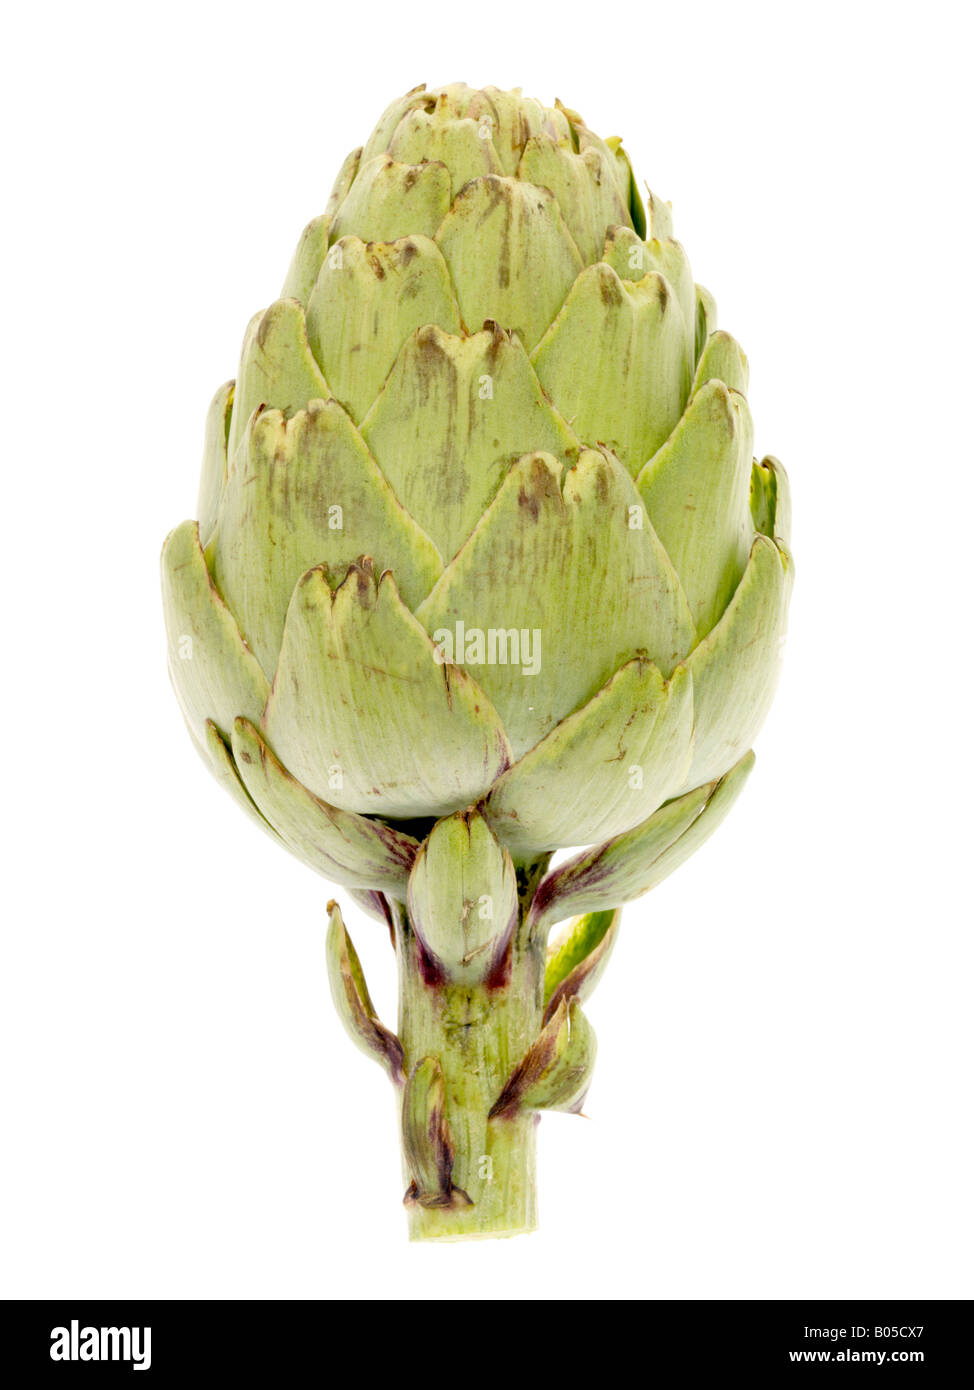 Fresh Ripe Uncooked Globe Artichoke Vegetable Isolated Against A White Background With A Clipping Path And No People Stock Photo